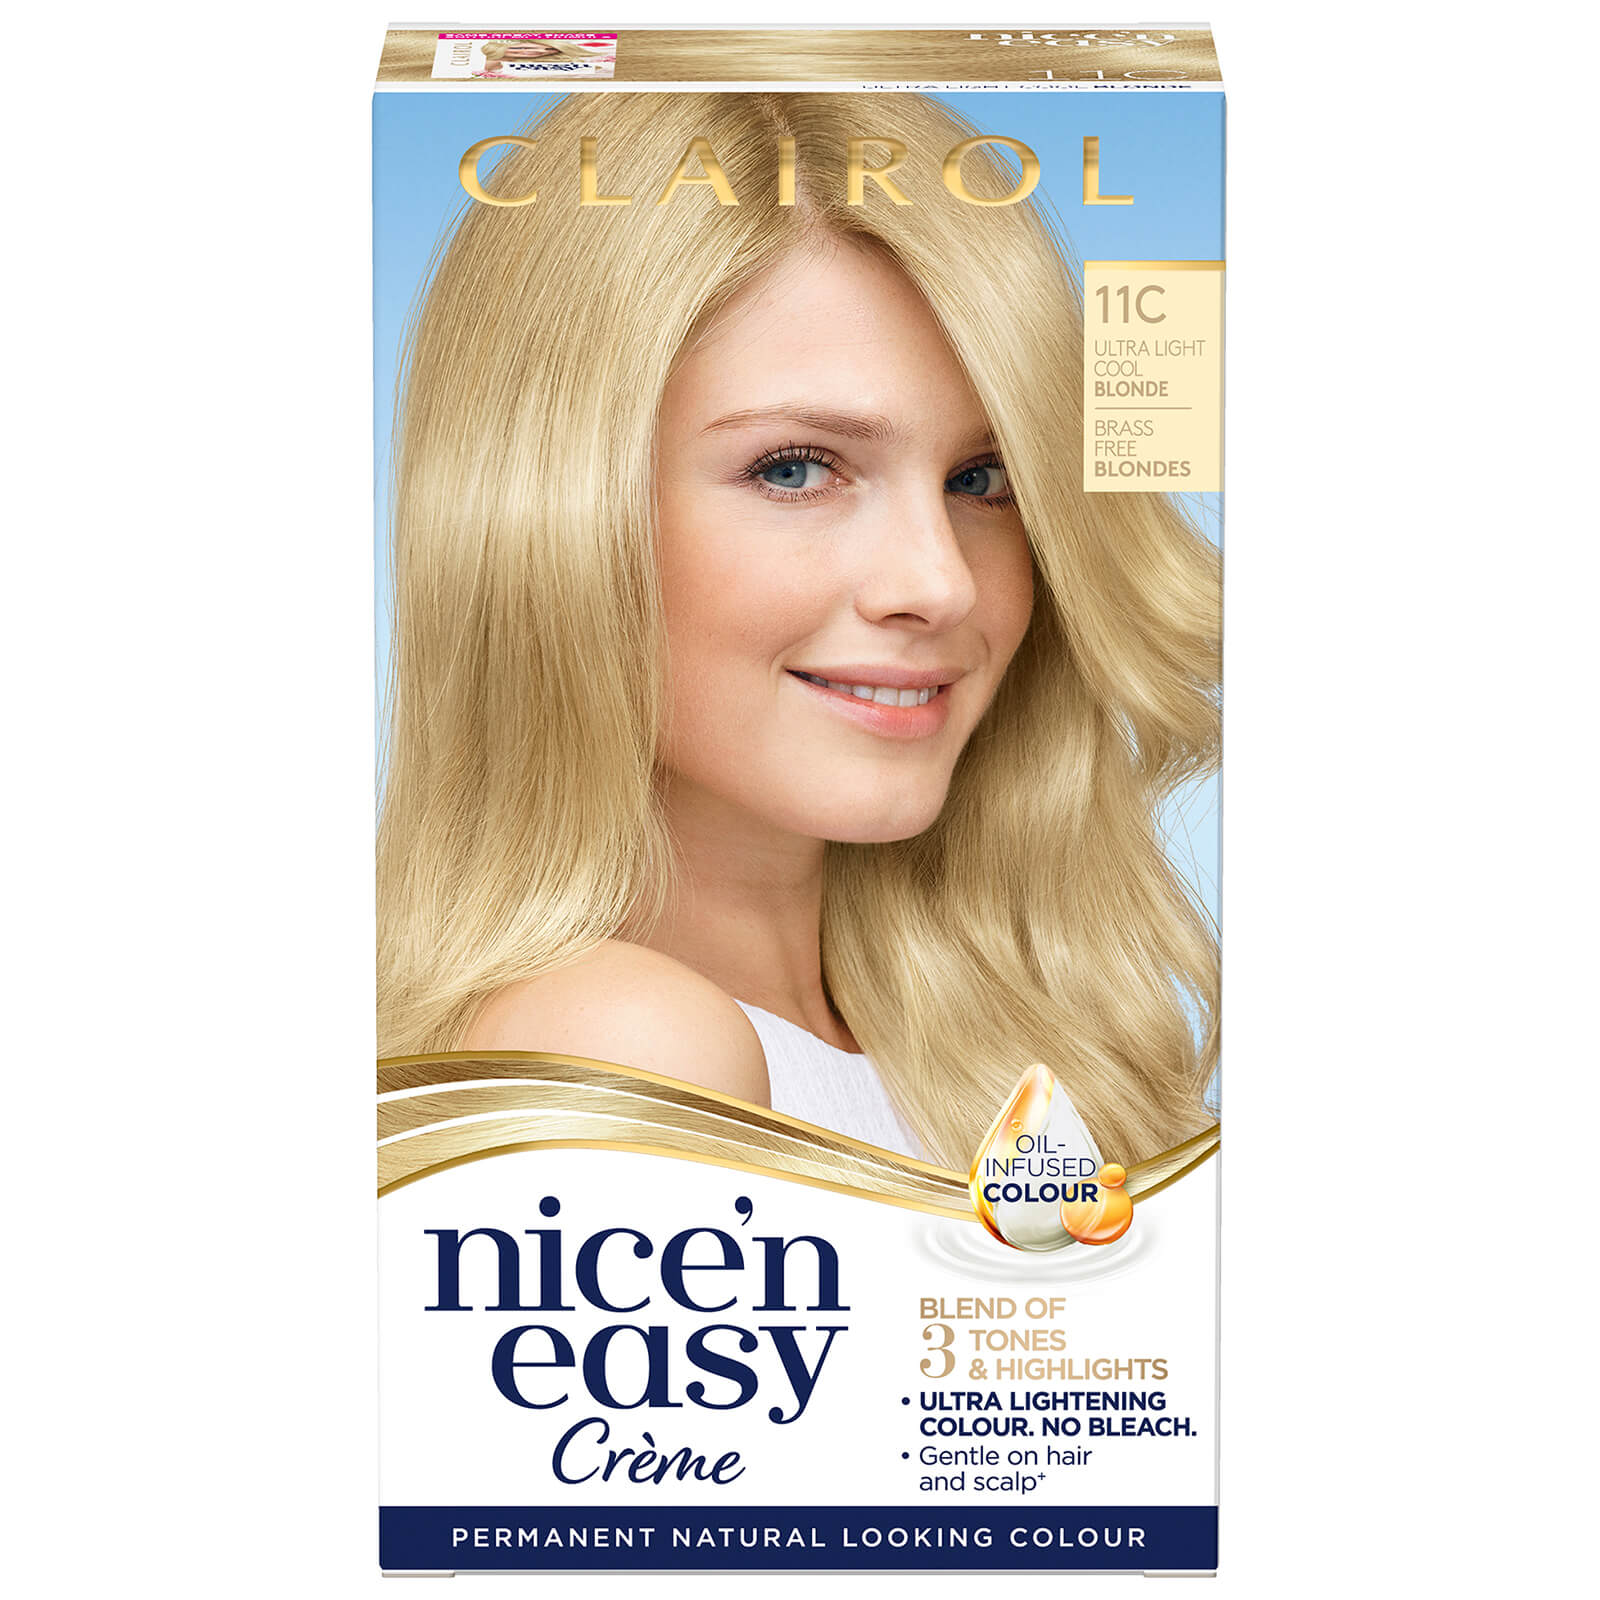 Clairol Nice' n Easy Crème Natural Looking Oil Infused Permanent Hair Dye 177ml (Various Shades) - 11C Ultra Light Cool Blonde